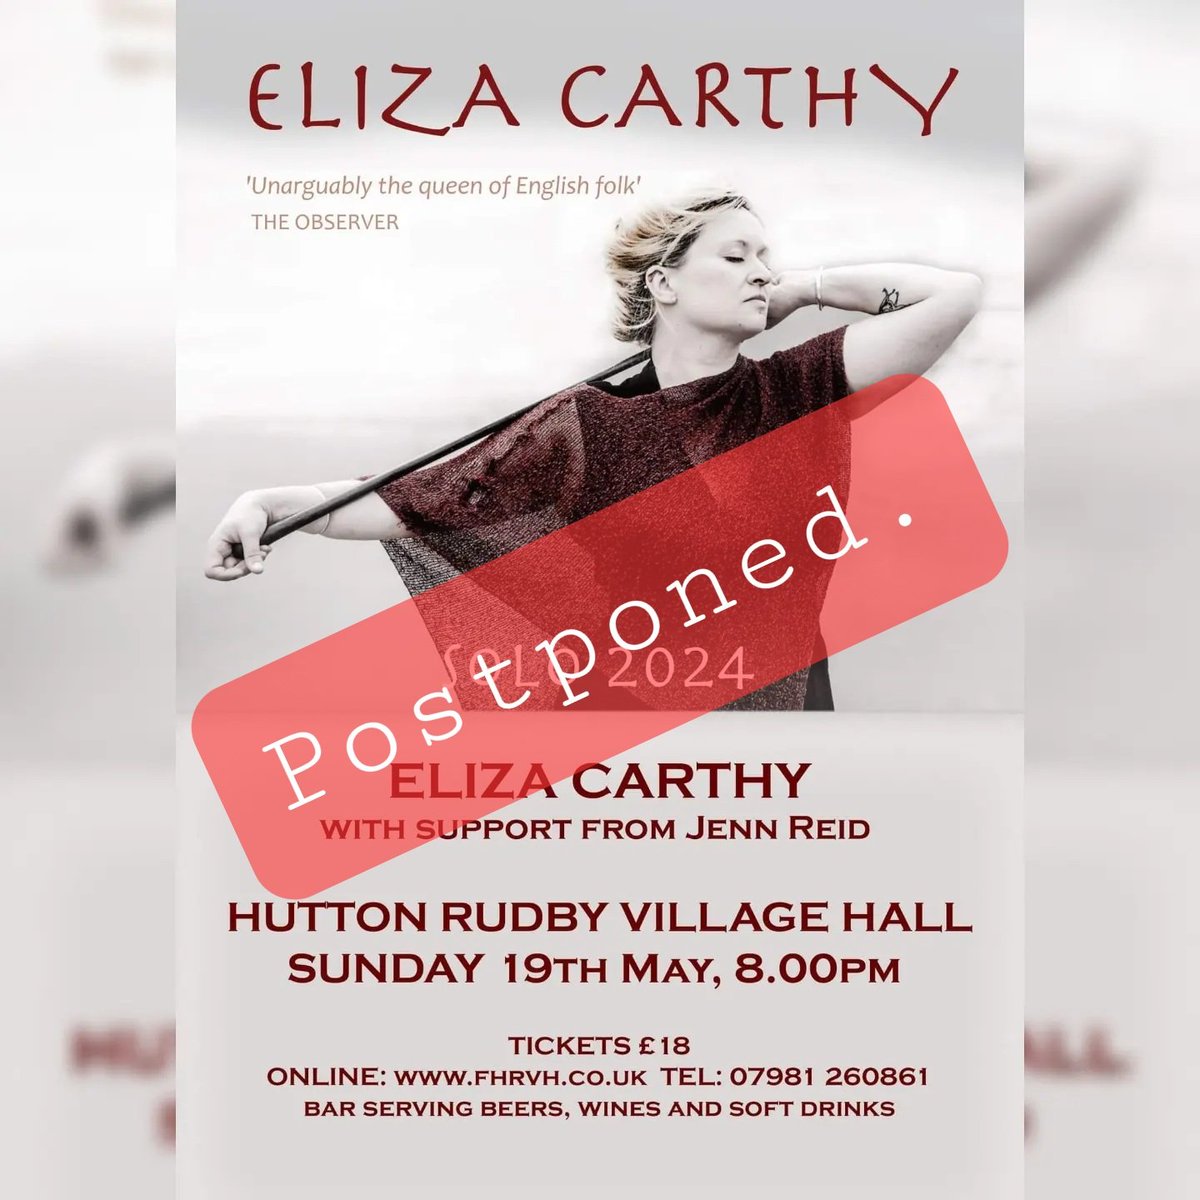 ‼️ POSTPONED:19 MAY, ELIZA CARTHY/JENN REID ‼️ We are very sorry to announce that Sunday's gig with @ElizaCarthy has been postponed due to illness. Never easy for an artist & we send our warmest wishes to Eliza for a speedy recovery. Ticket holders contacted & new date TBA.